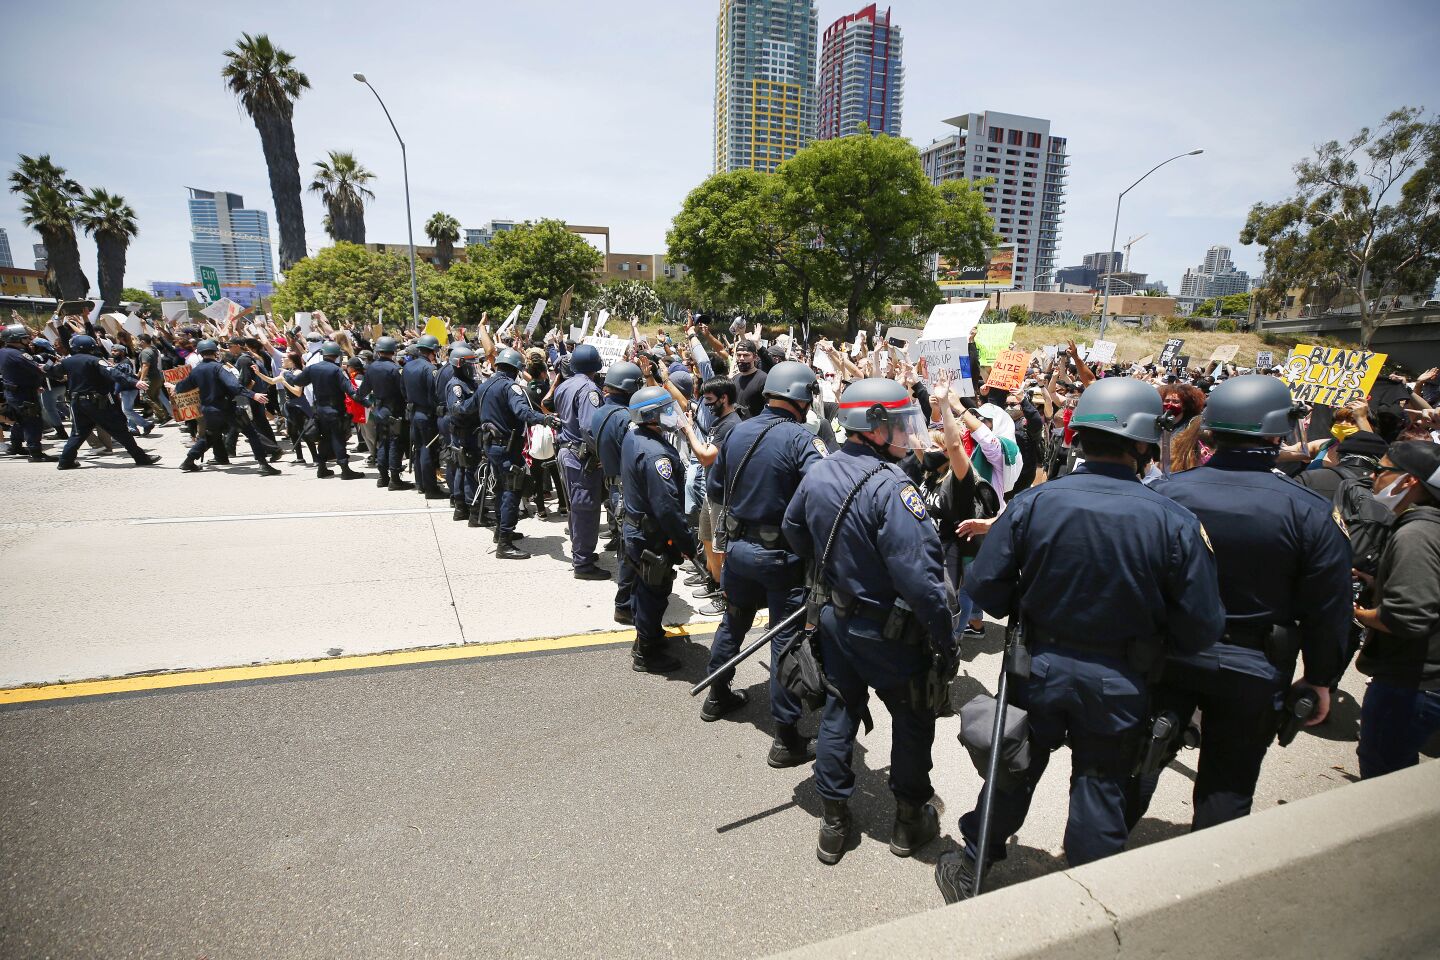 CHP officers try to hold back protesters as they march down I-5 in downtown San Diego on May 31, 2020.